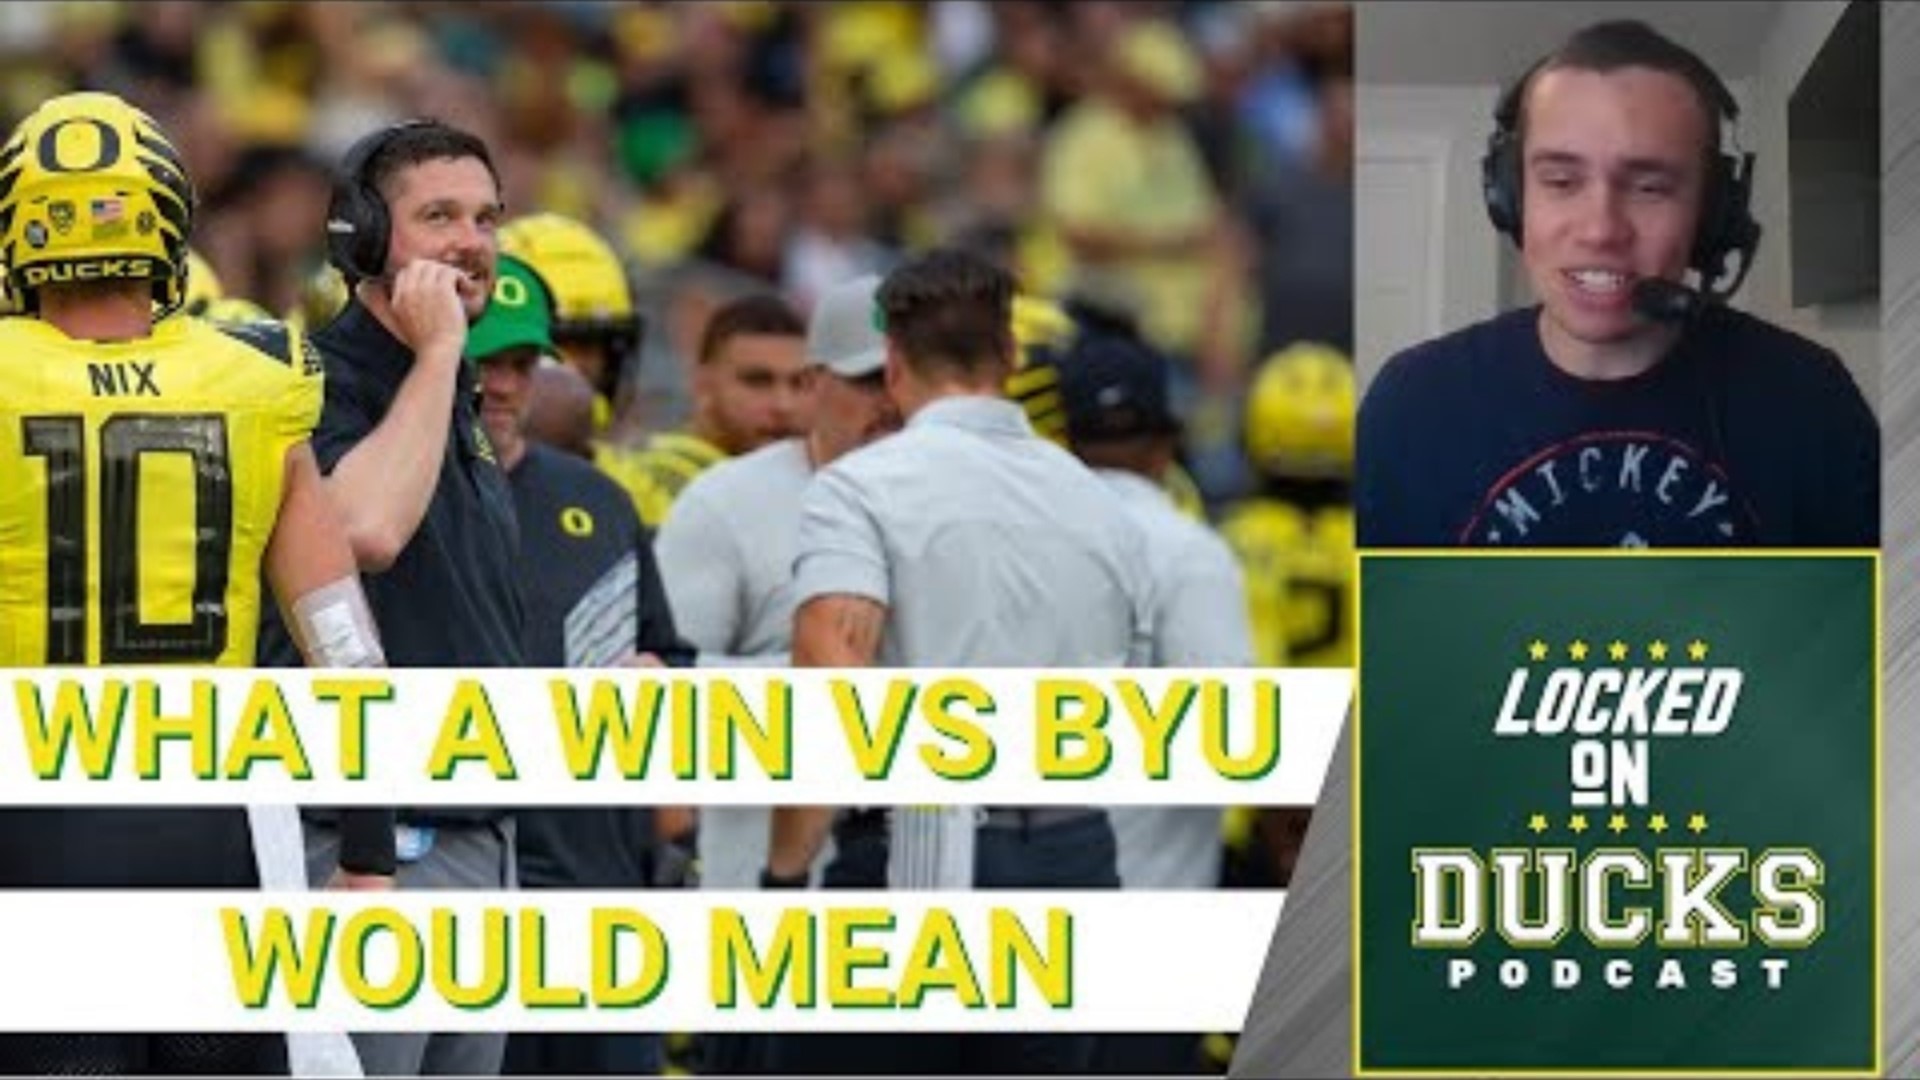 Oregon is welcoming a ranked non-conference opponent to Autzen Stadium for the first time in eight years when No. 12 BYU comes to town this weekend.